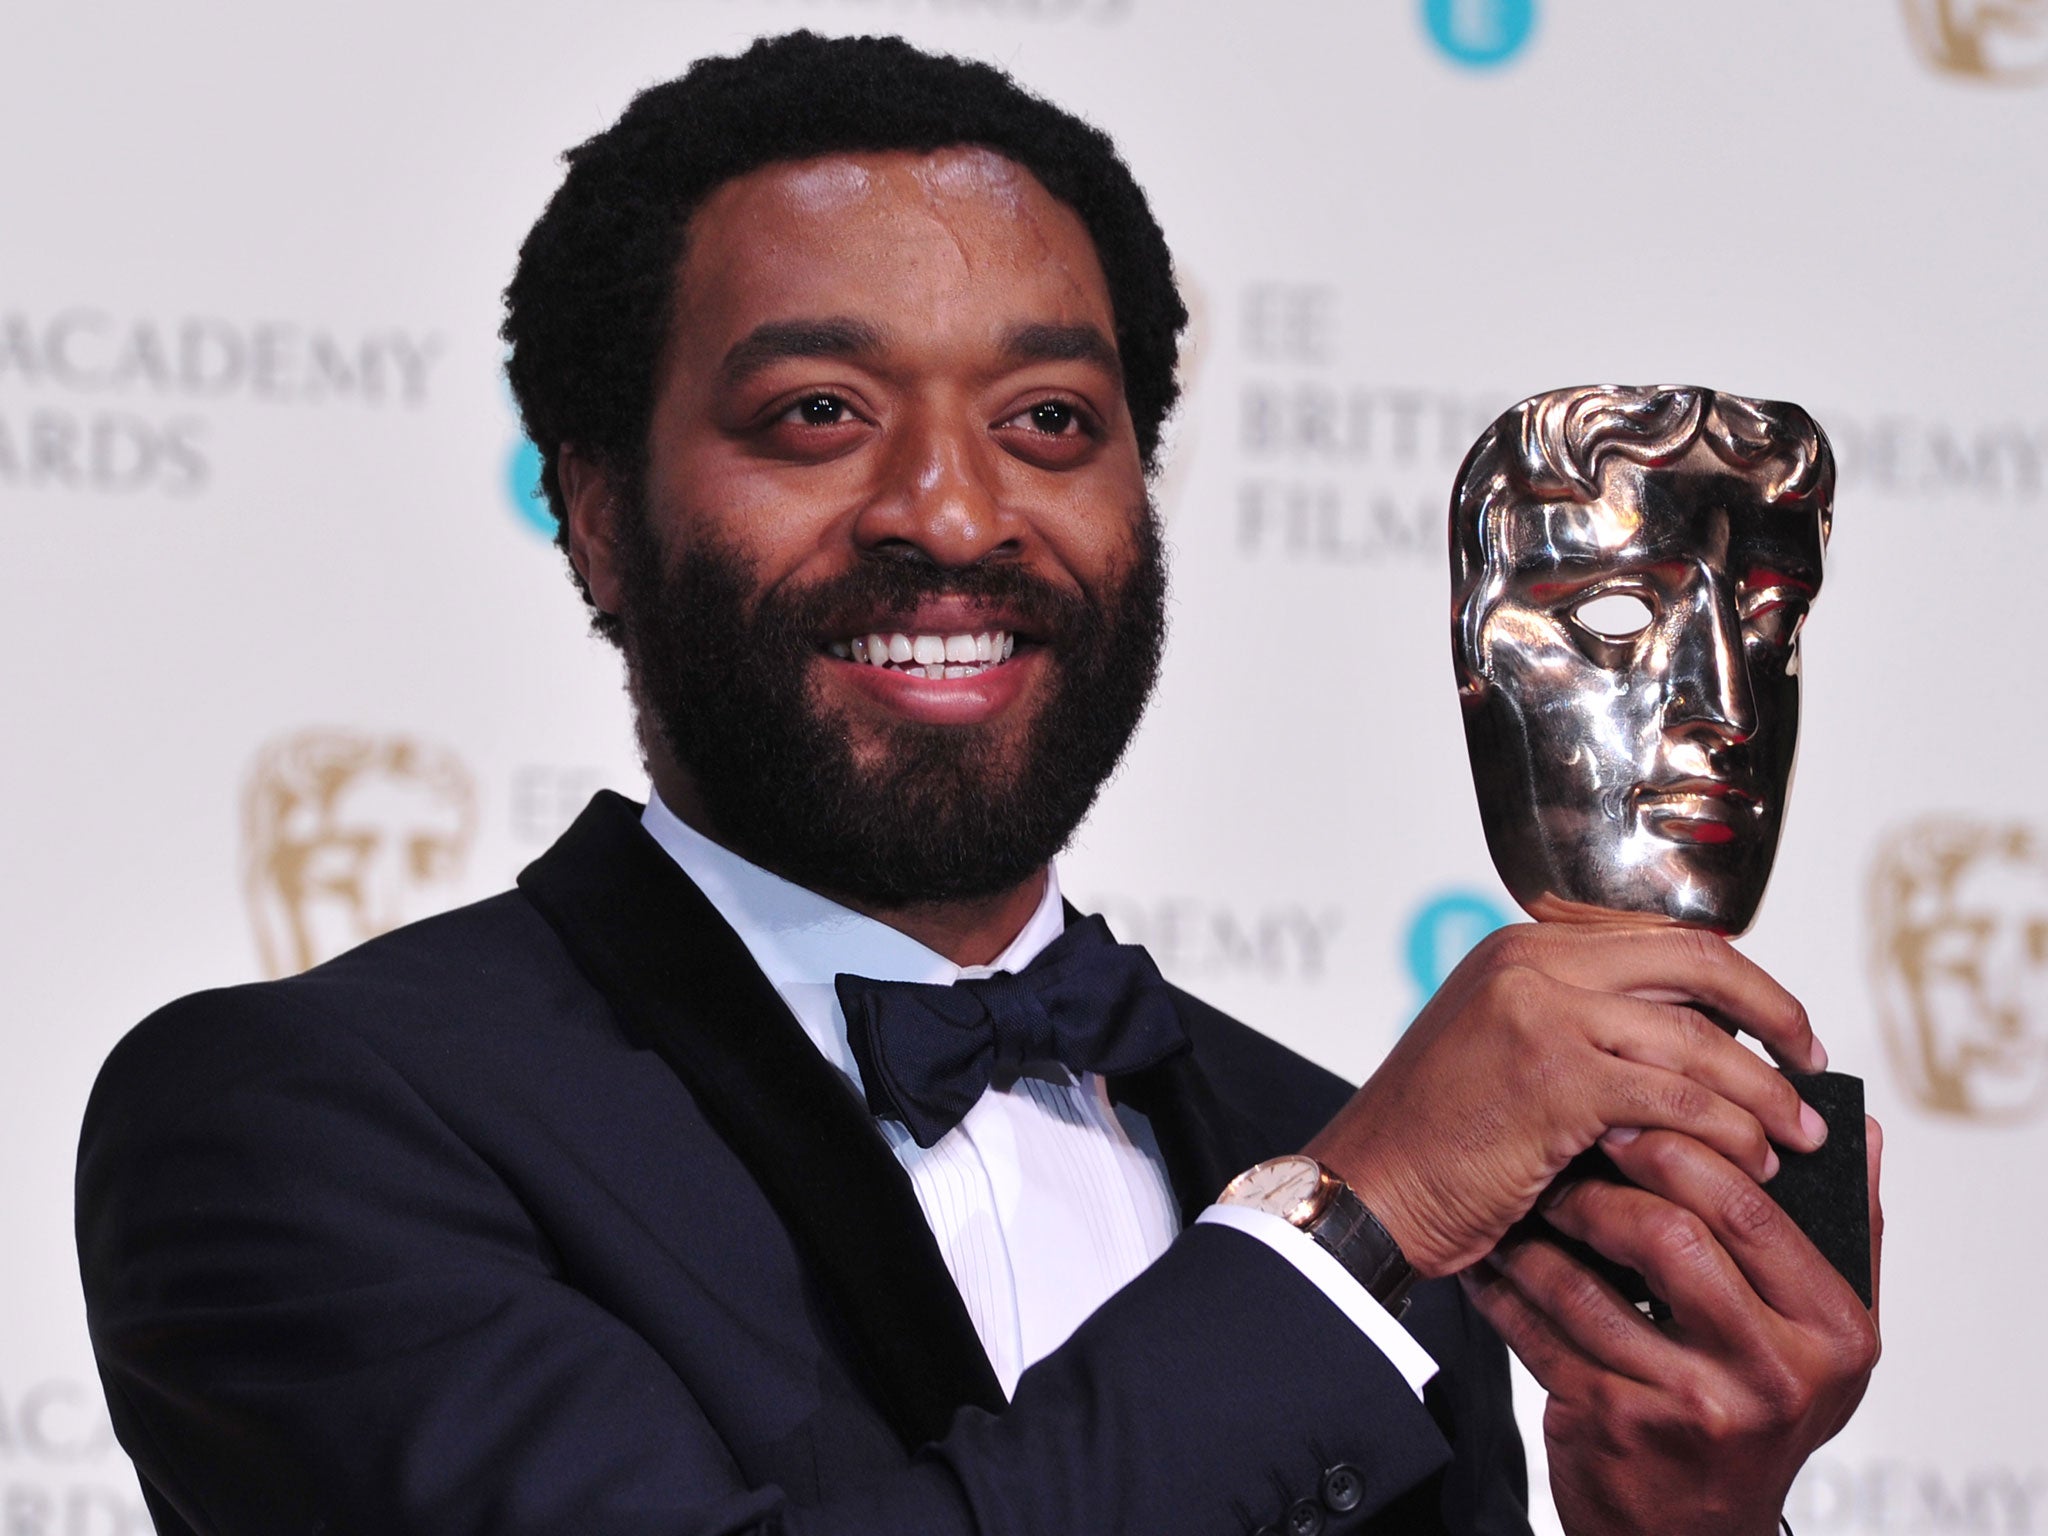 Chiwetel Ejiofor poses with the award for a leading actor for his work on the film '12 Years a Slave'